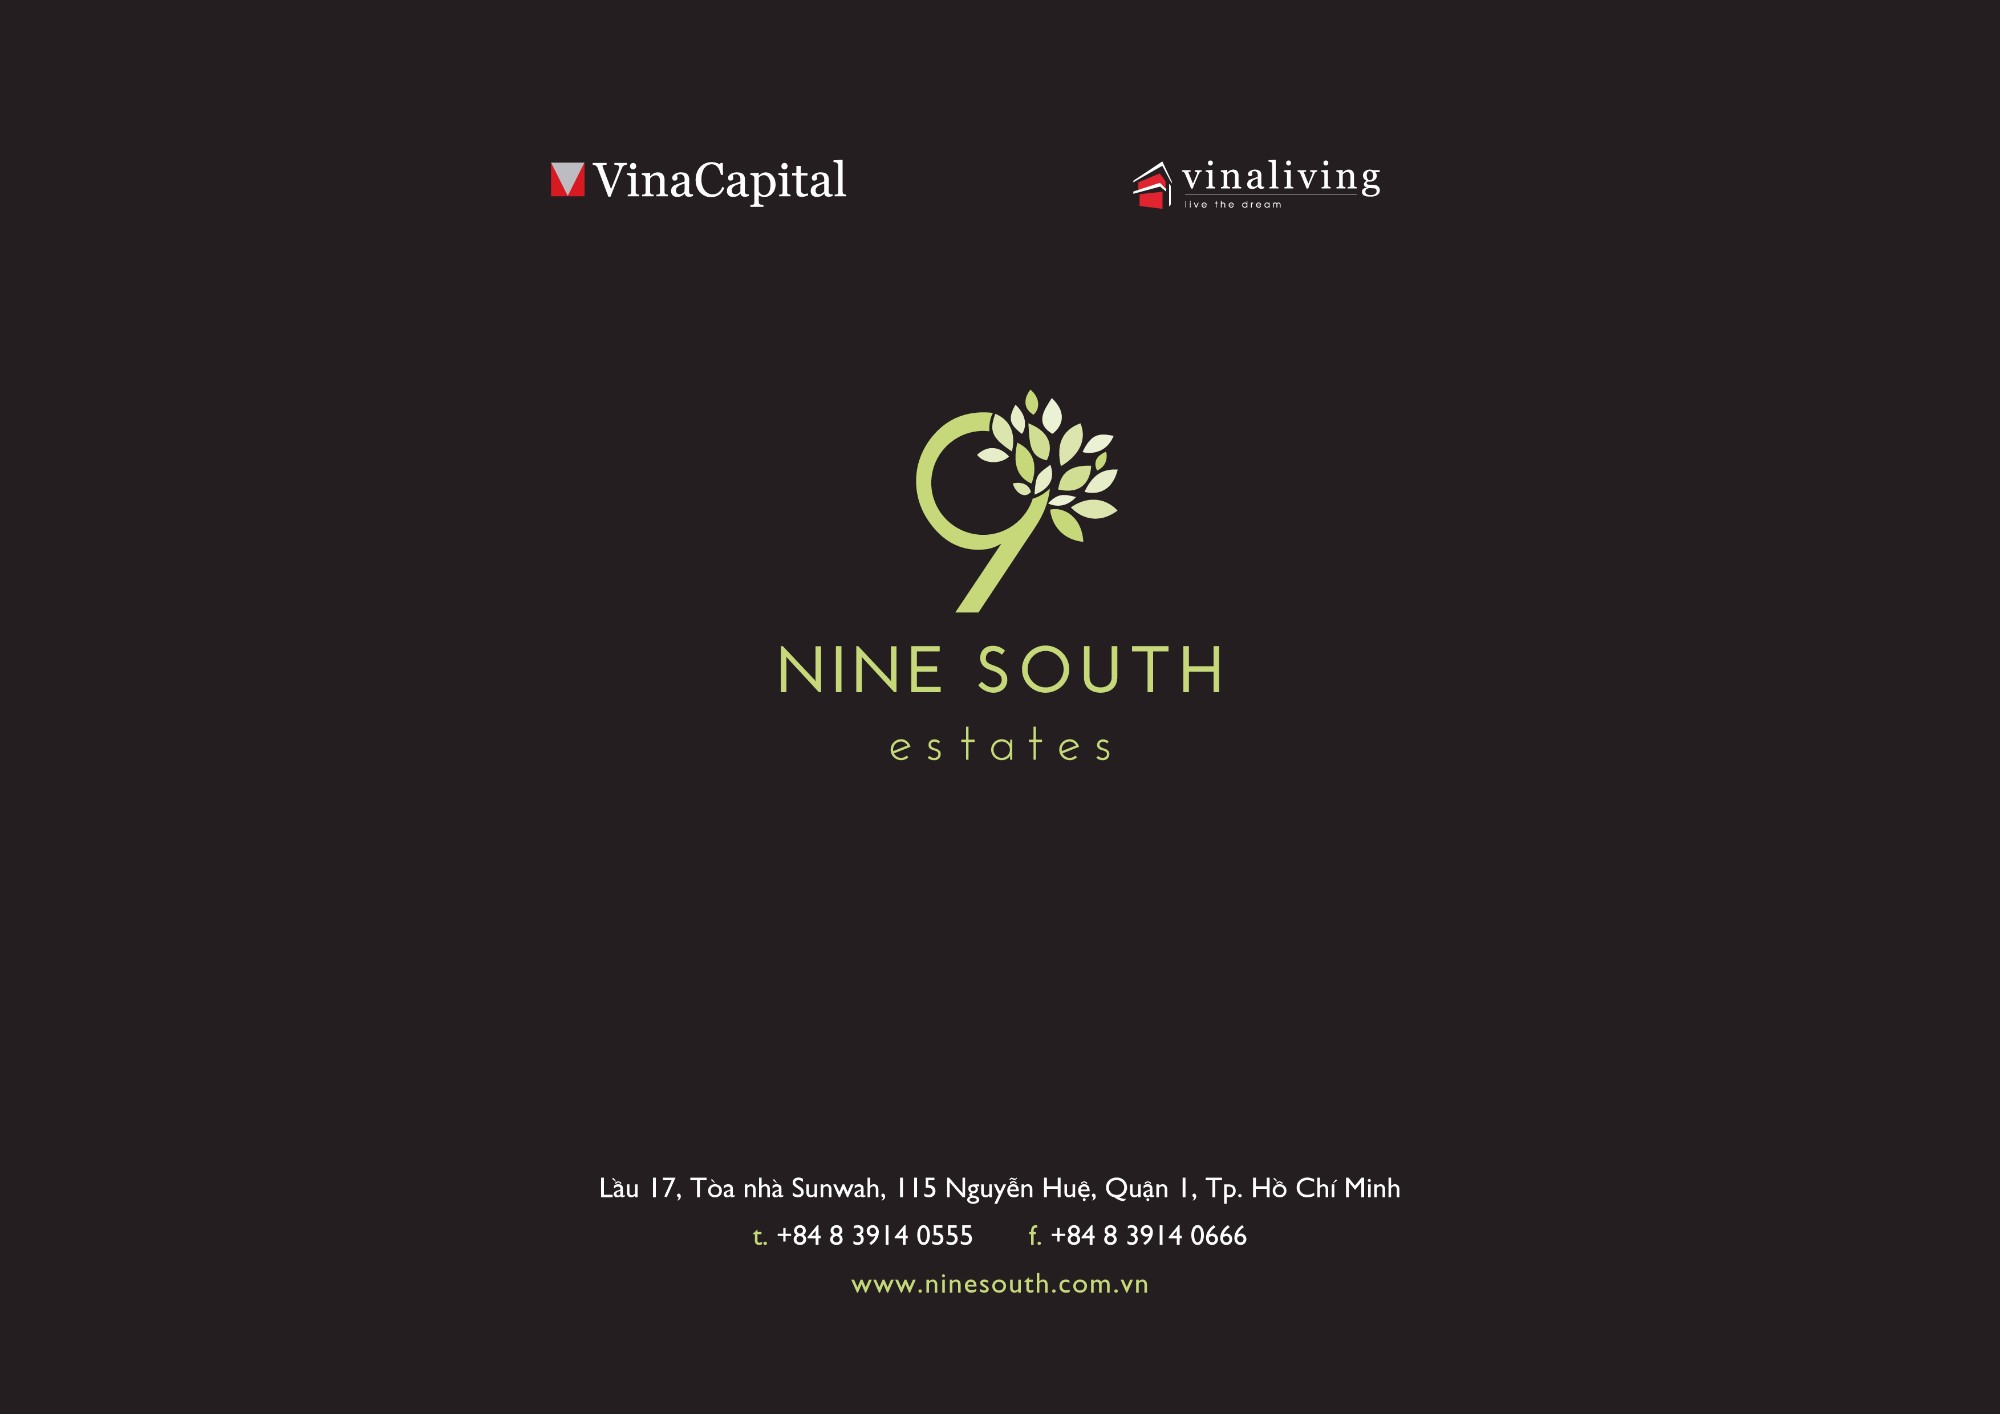 NineSouthConstructionupdate2017Aprilhires10.jpg